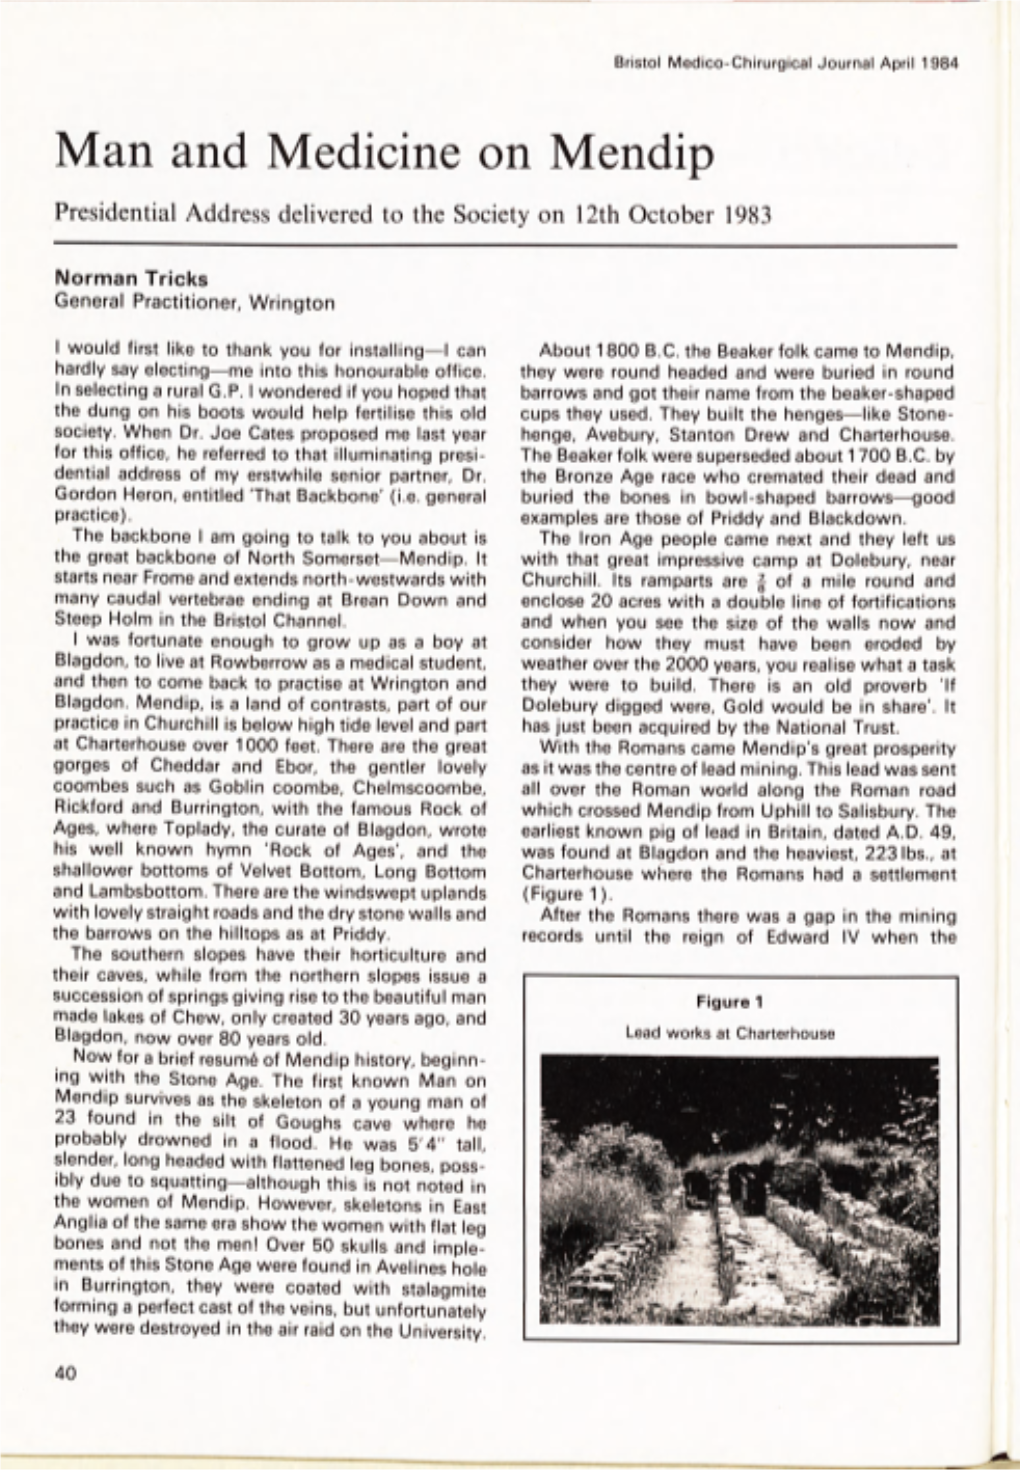 Man and Medicine on Mendip Presidential Address Delivered to the Society on 12Th October 1983